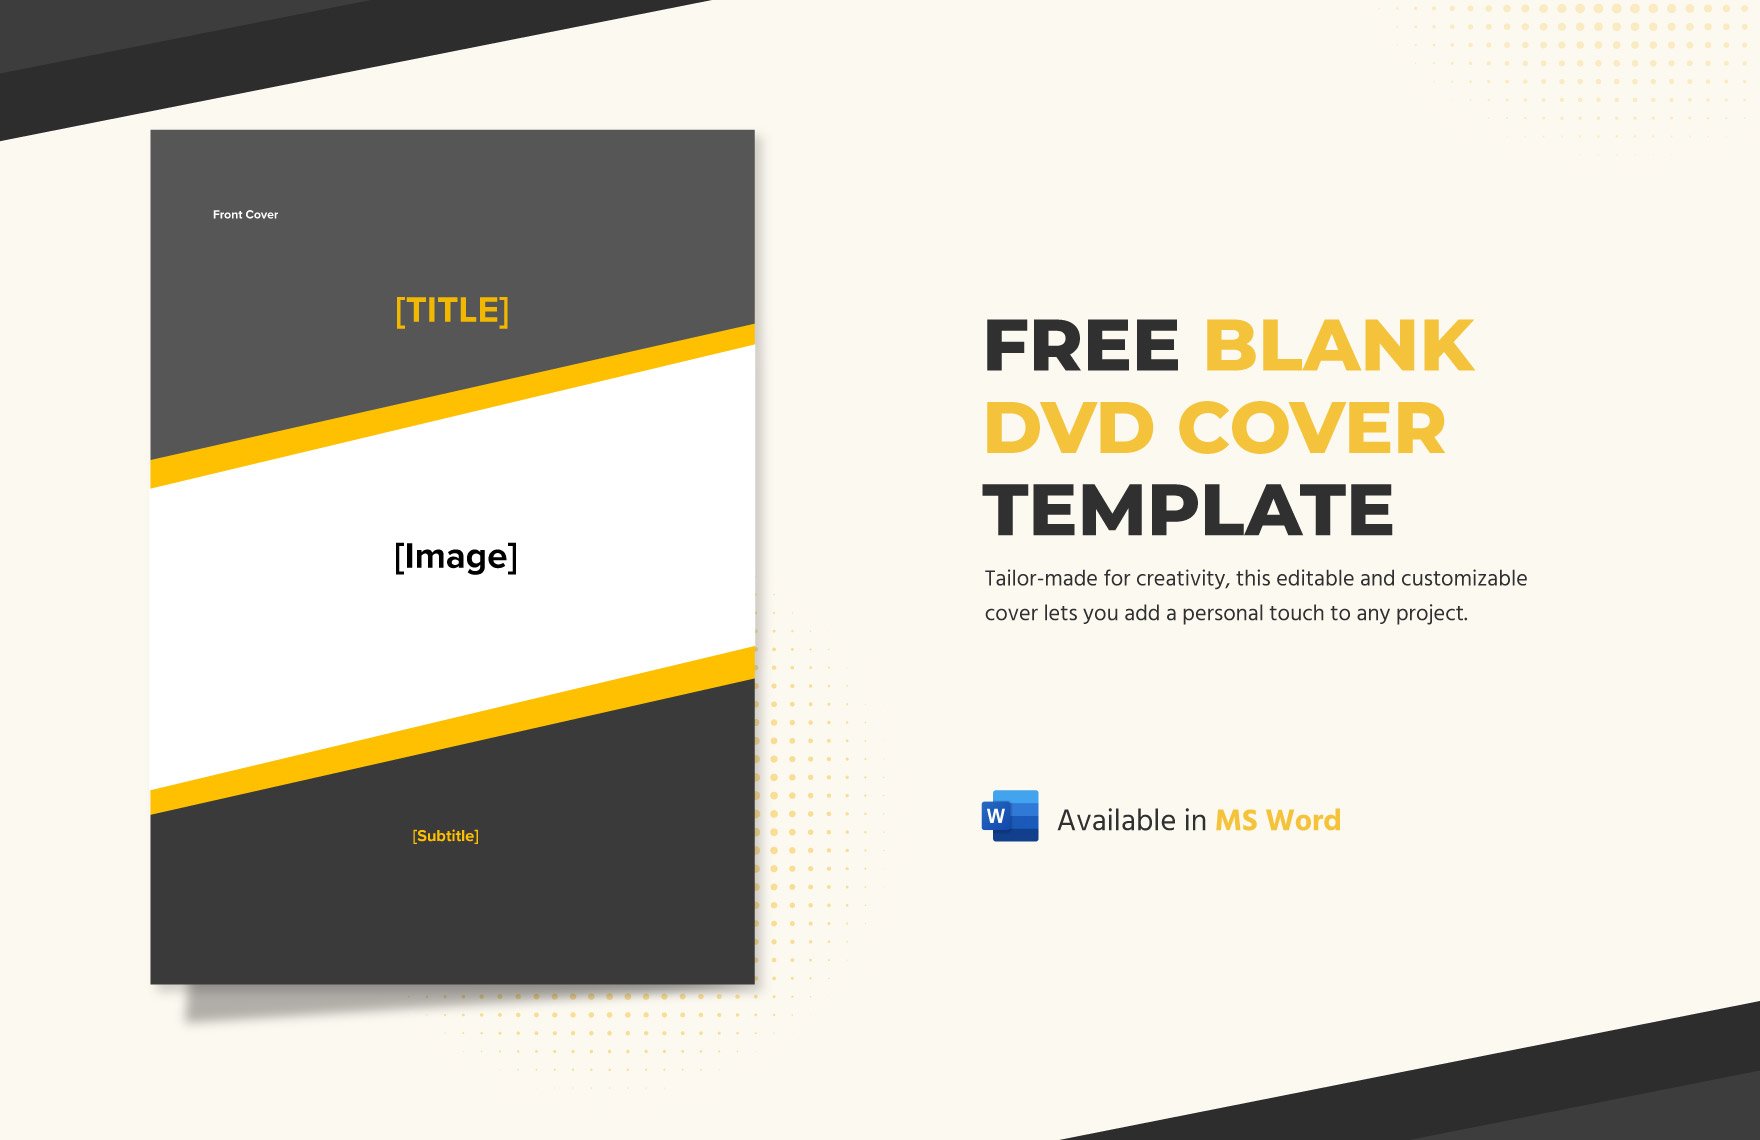 Free Blank DVD Cover Template in Word